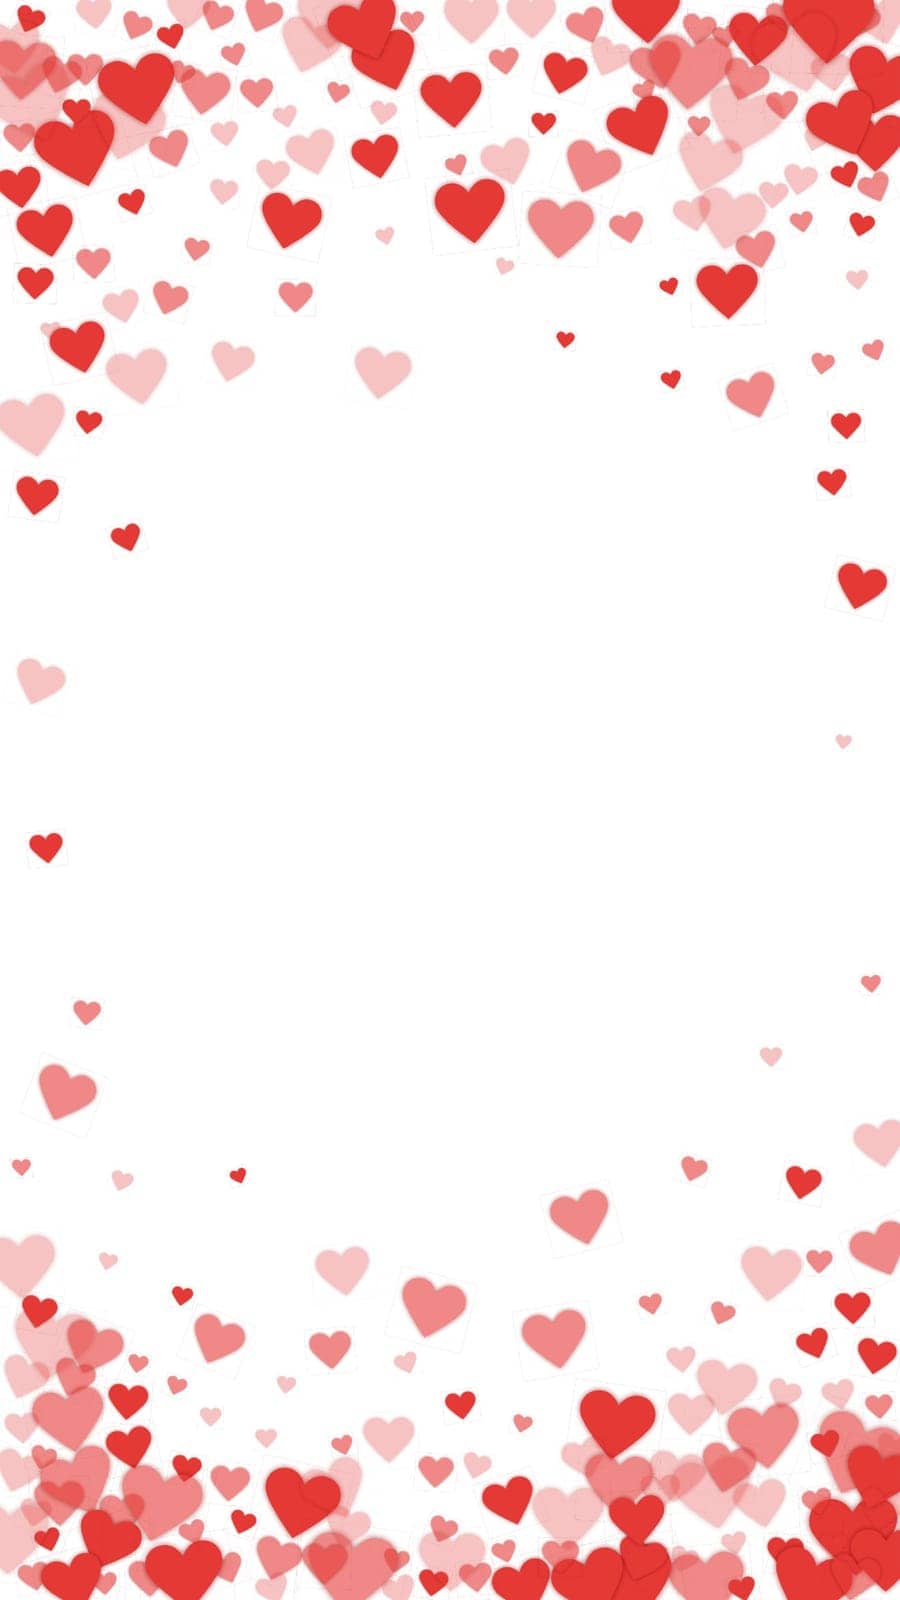 Red hearts scattered on white background. by beginagain